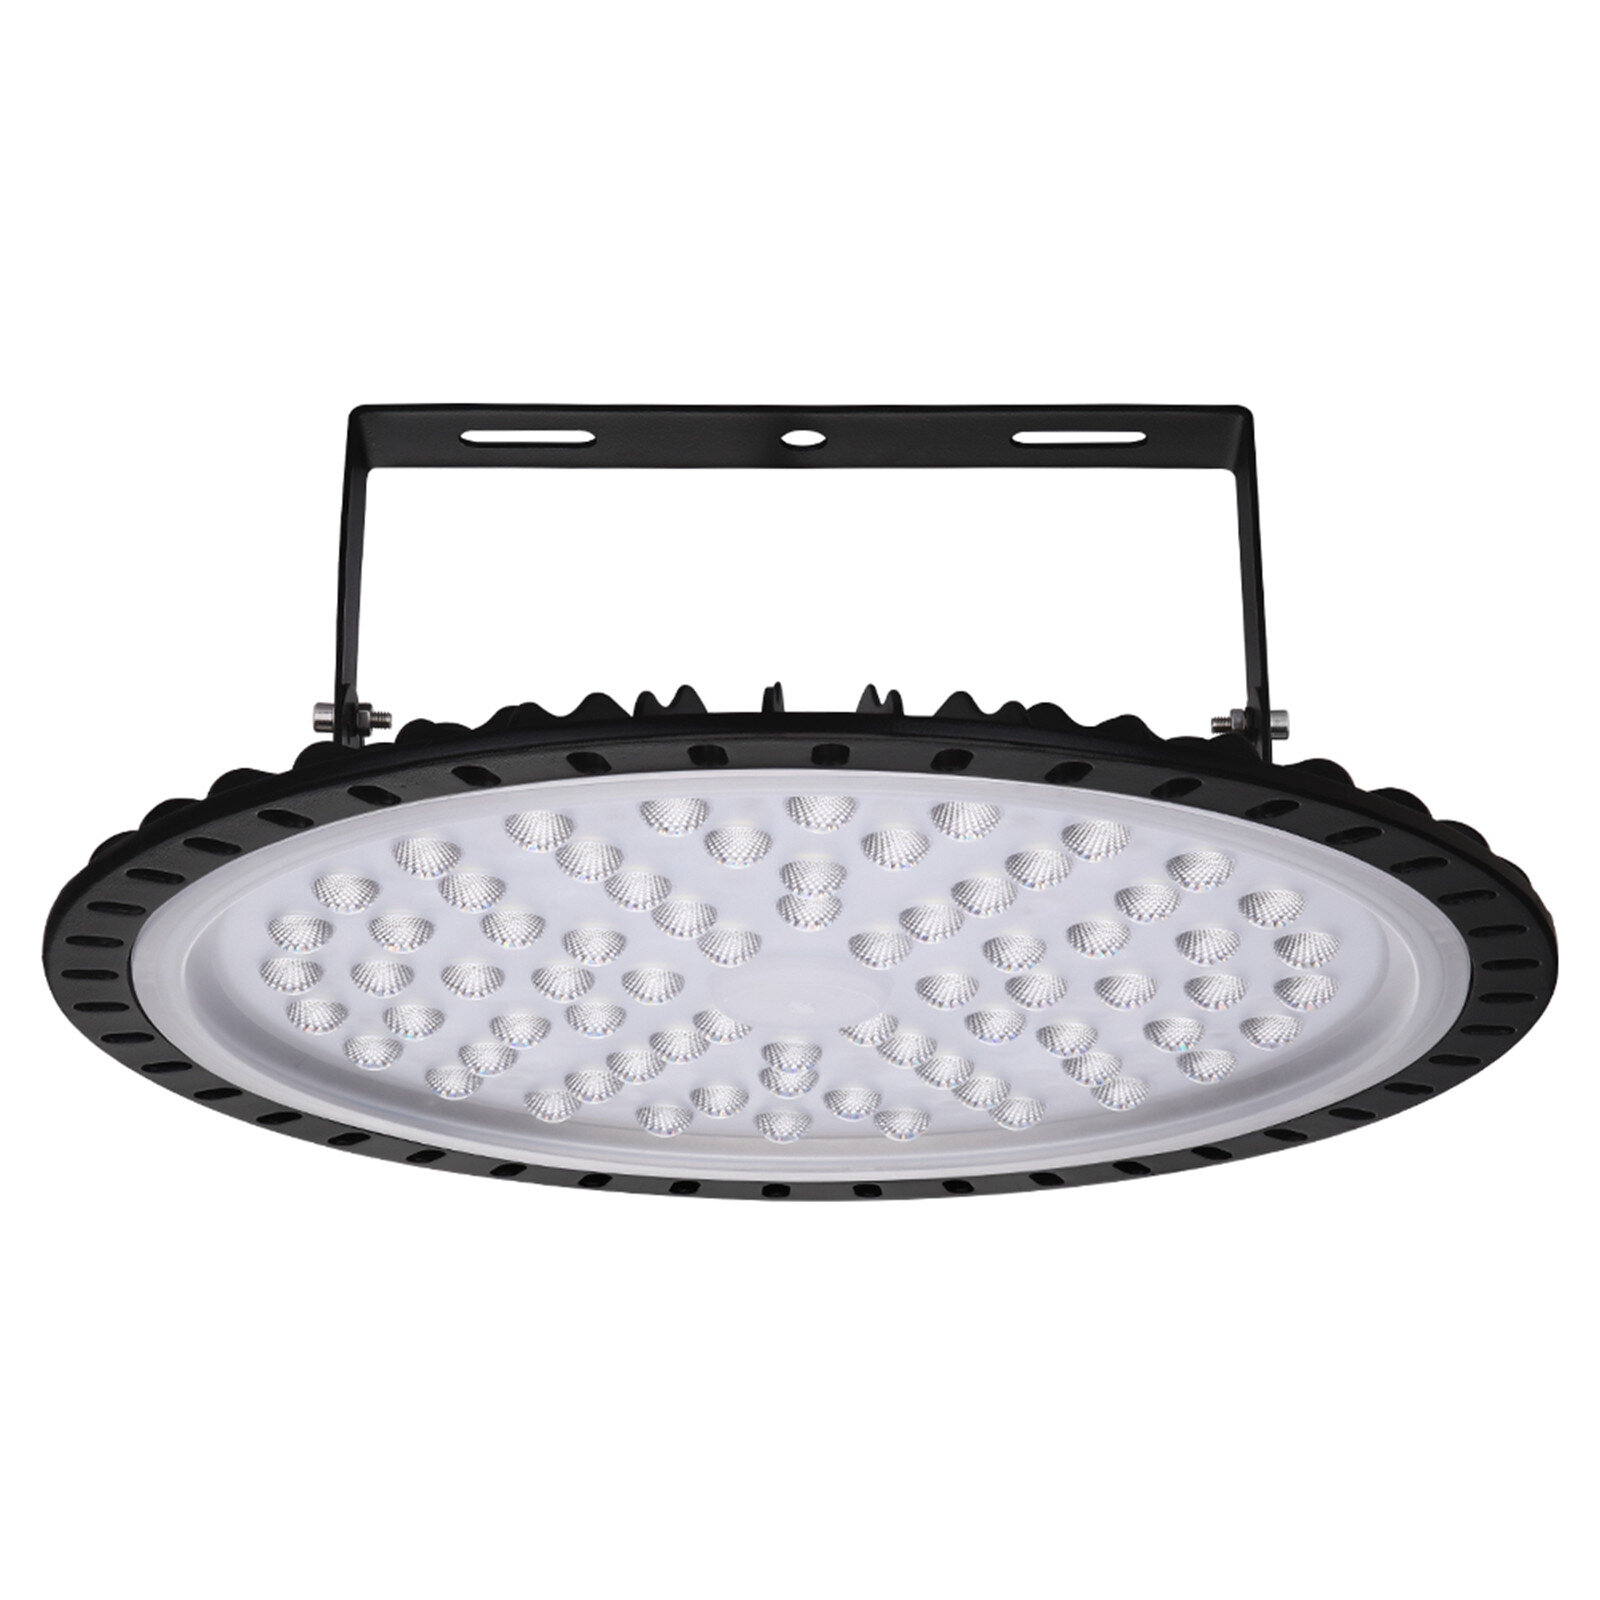 Warehouse LED 300W UFO High Bay Lights Factory Shop GYM Light Lamp Cold White 